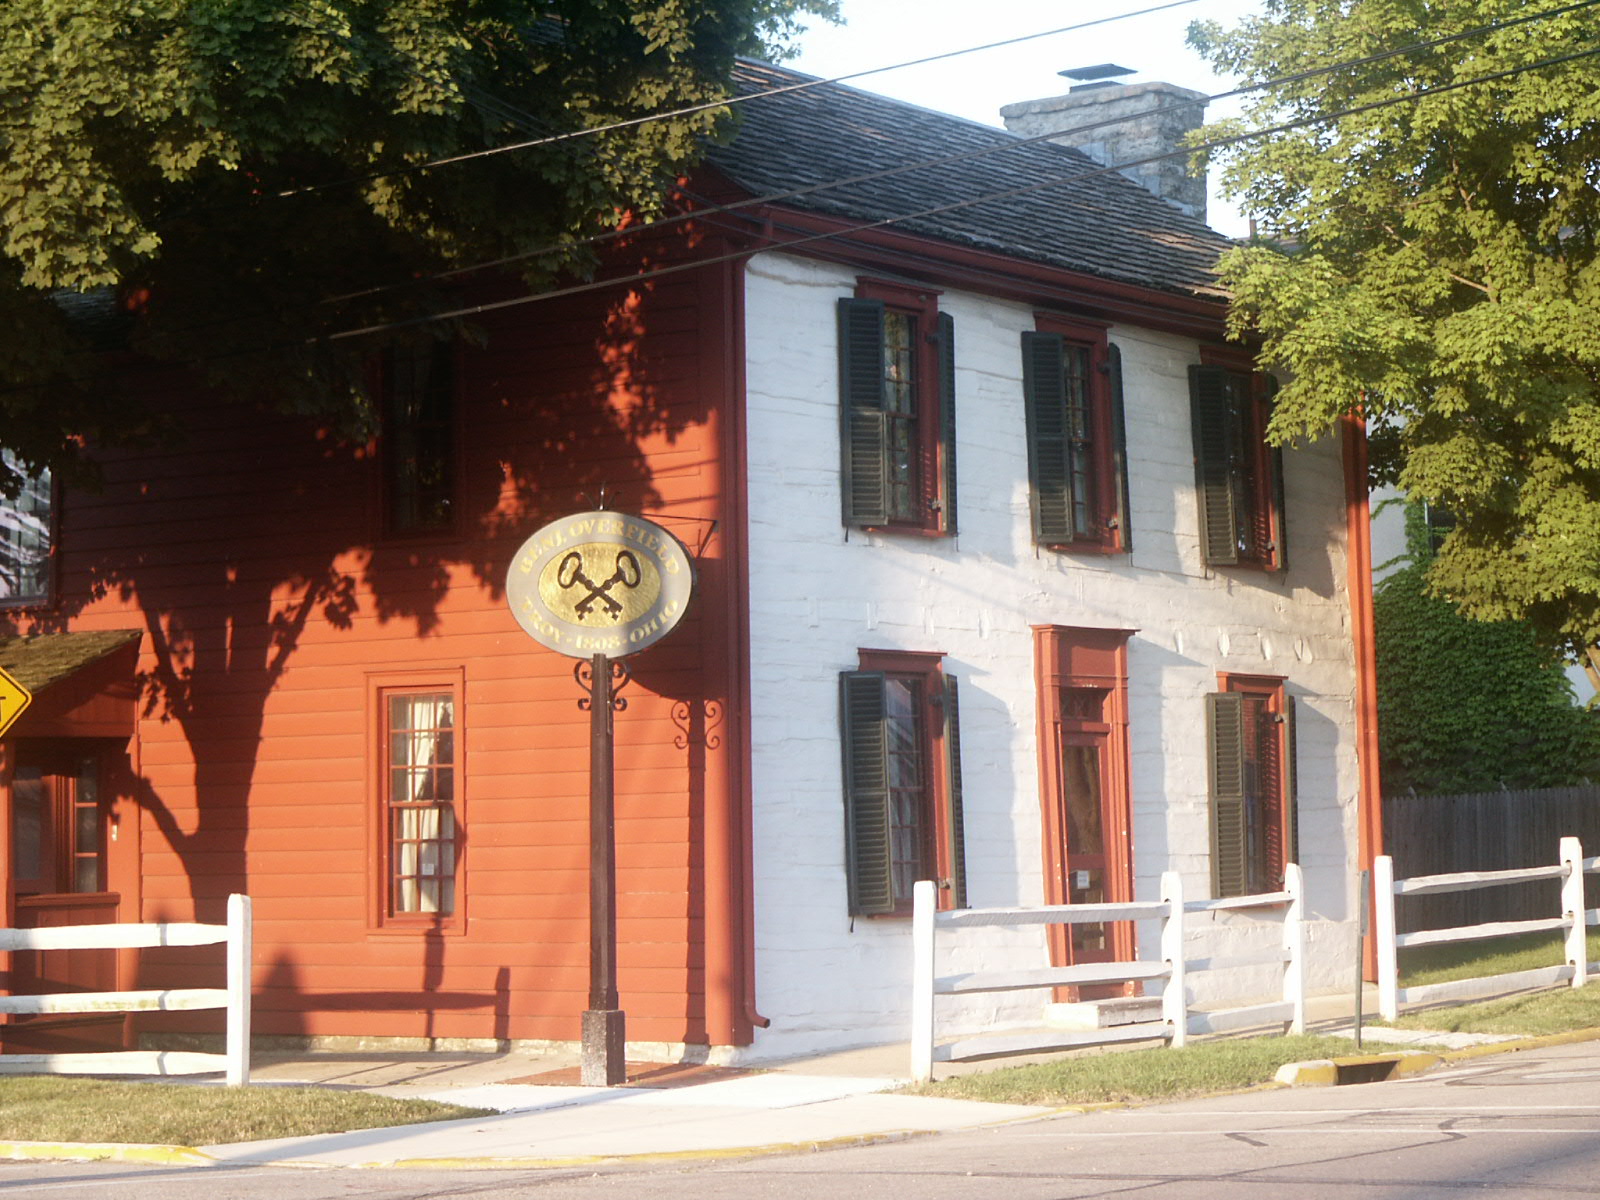 The Overfield Tavern was built in 1808 and was a place where vistors came for good food, good drink, and good conversation.  Today, the tavern has been transformed into a museum where visitors go to experience the frontier life.